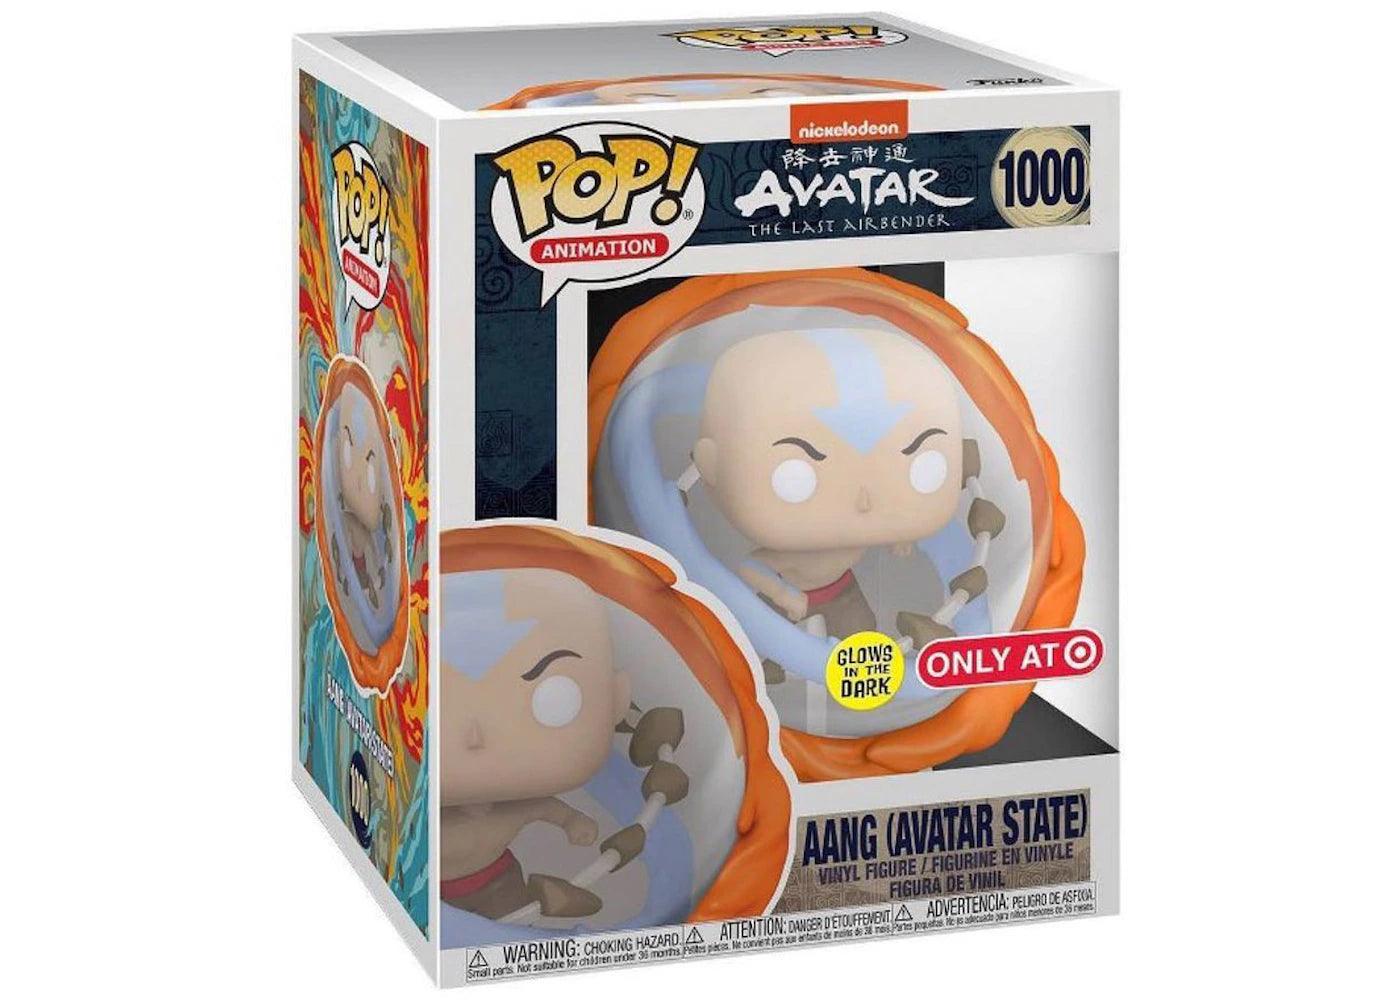 Avatar The Last Airbender: Funko Pop! Animation - Aang (Avatar State) #1000 - Magic Dreams Store